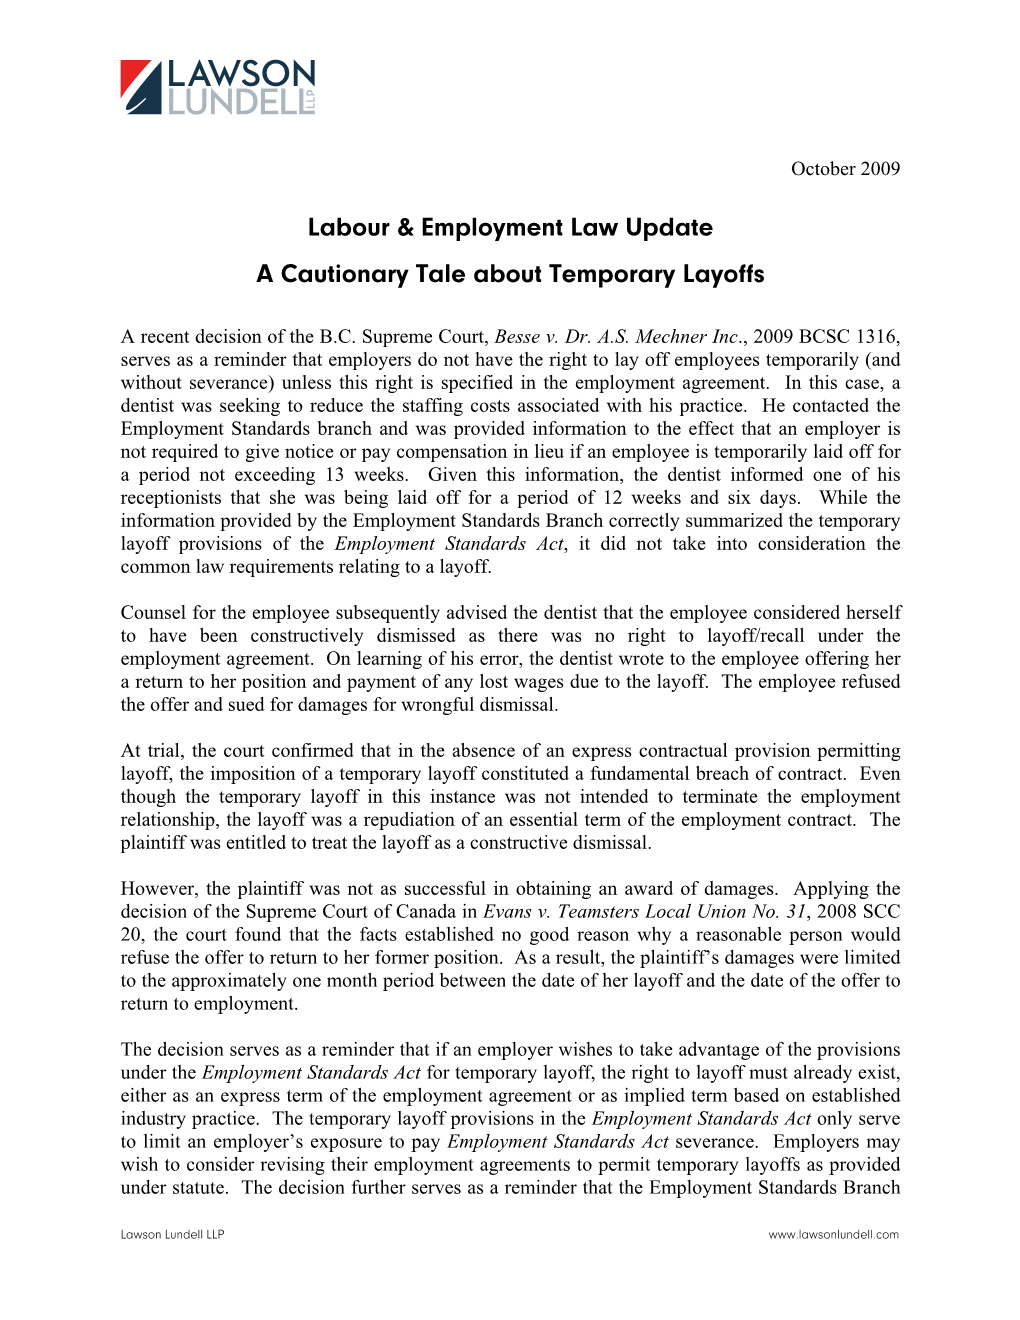 Labour & Employment Law Update a Cautionary Tale About Temporary